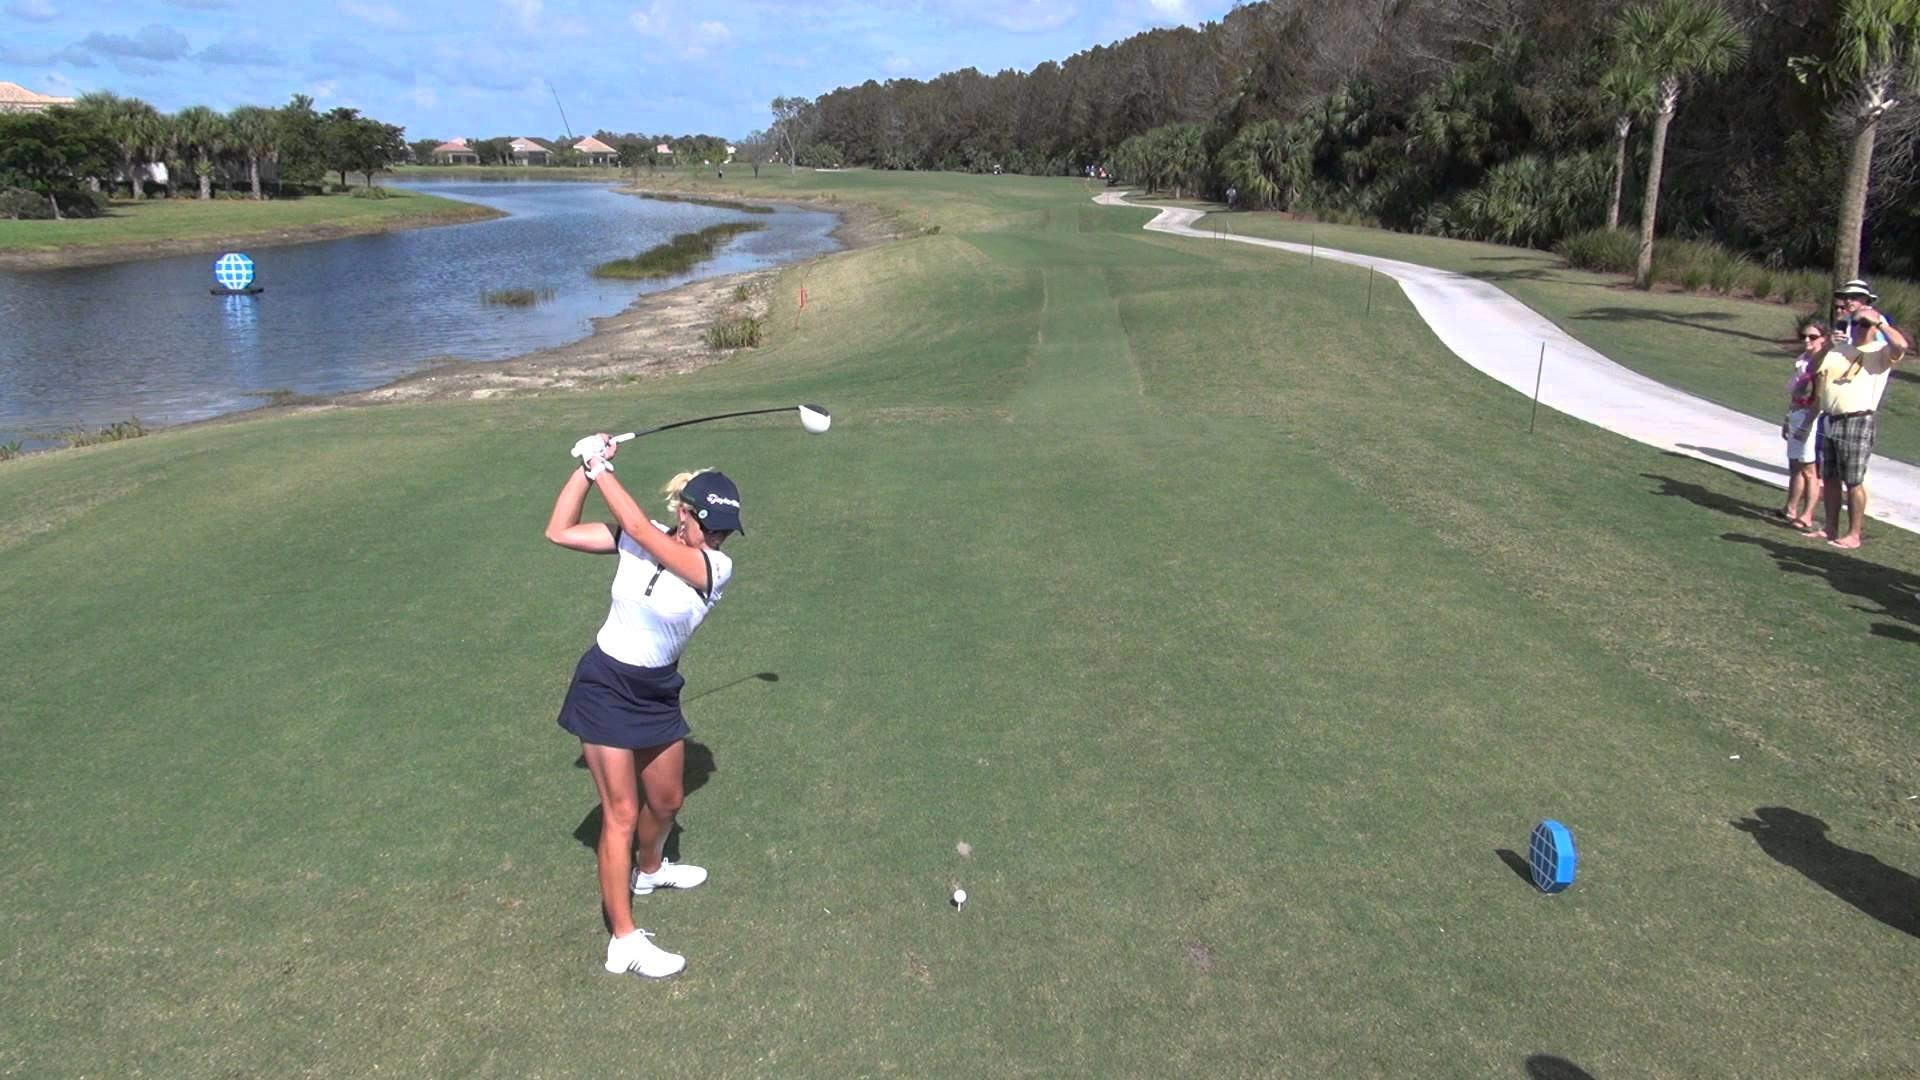 1920x1080 GOLF SWING 2012 - NATALIE GULBIS DRIVER - ELEVATED DTL & SLOW MOTION - HQ  1080p HD